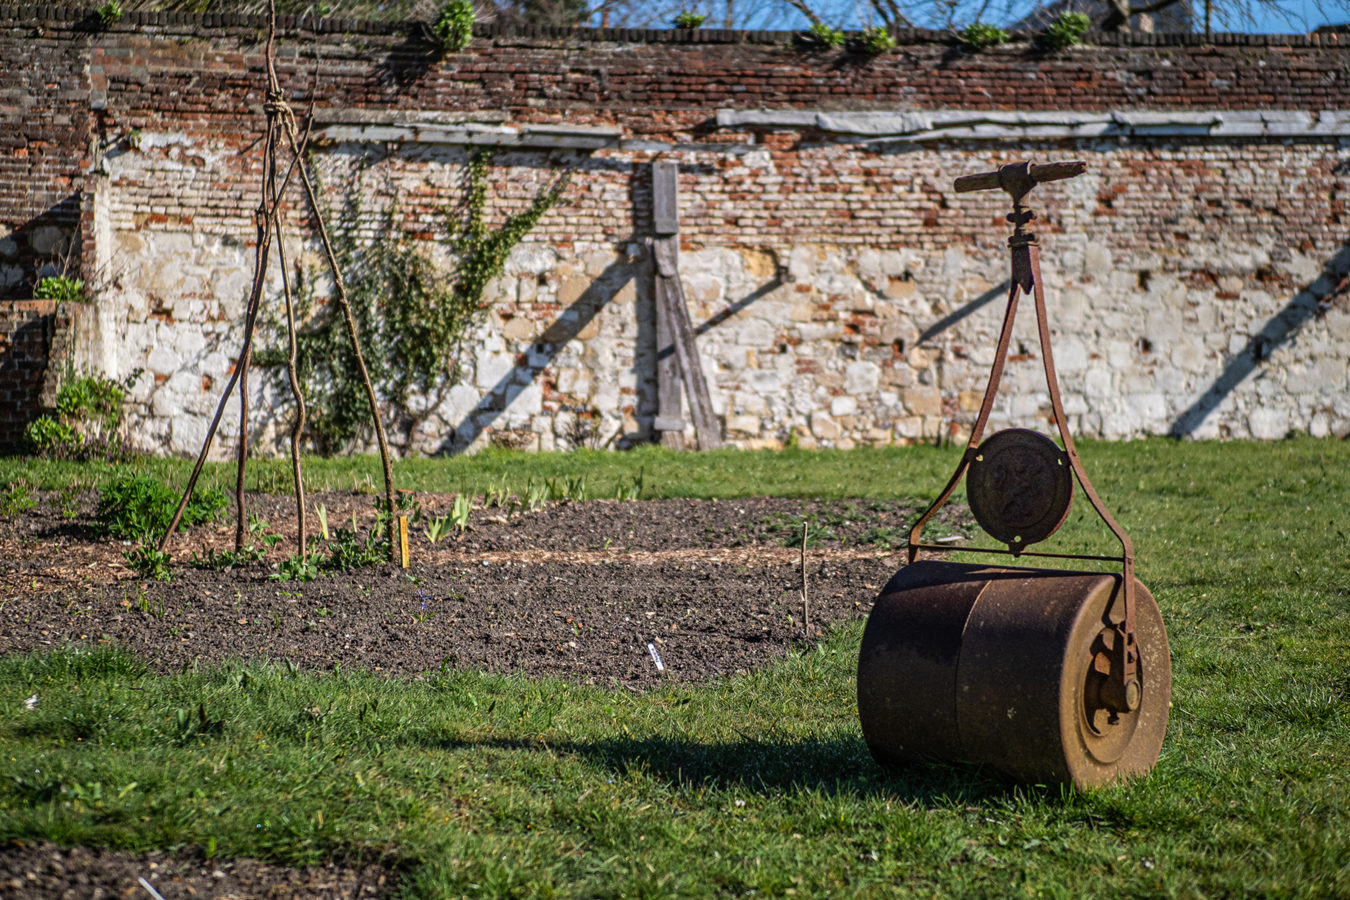 Vintage garden cast iron lawn roller with the Franciscan Gardens in the background